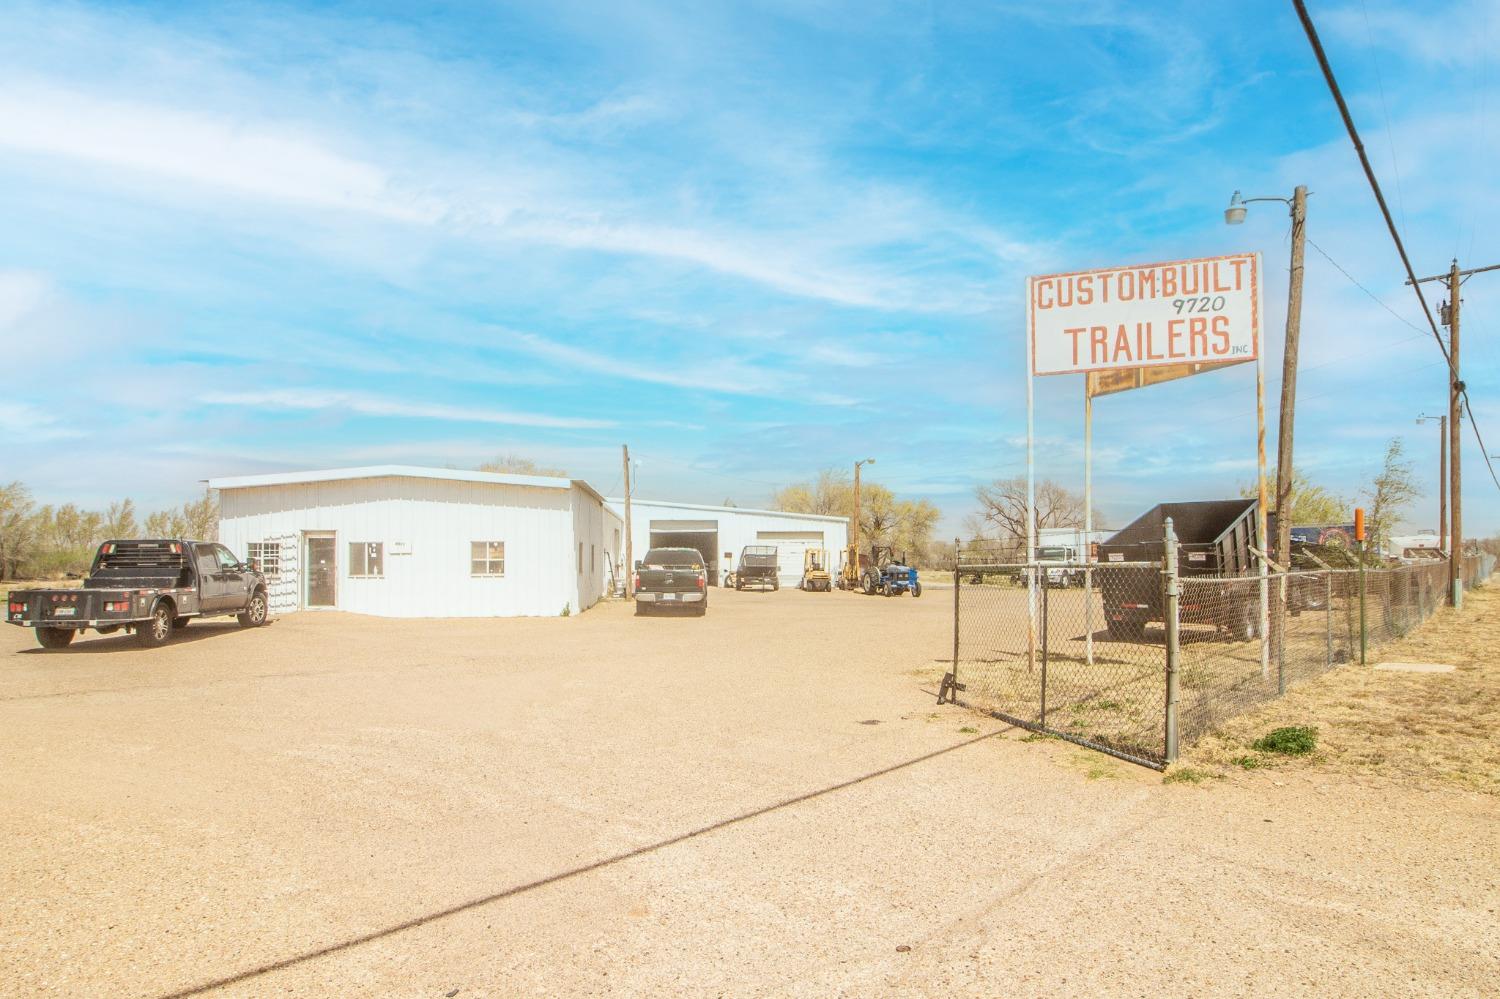 12,665 square foot shop on Highway 114 just east of Lubbock towards Idalou. This shop is currently a trailer manufacturer with 3,000 square feet of office space all sitting on 2 acres. Schedule your showing today and contact the listing agent for more information.